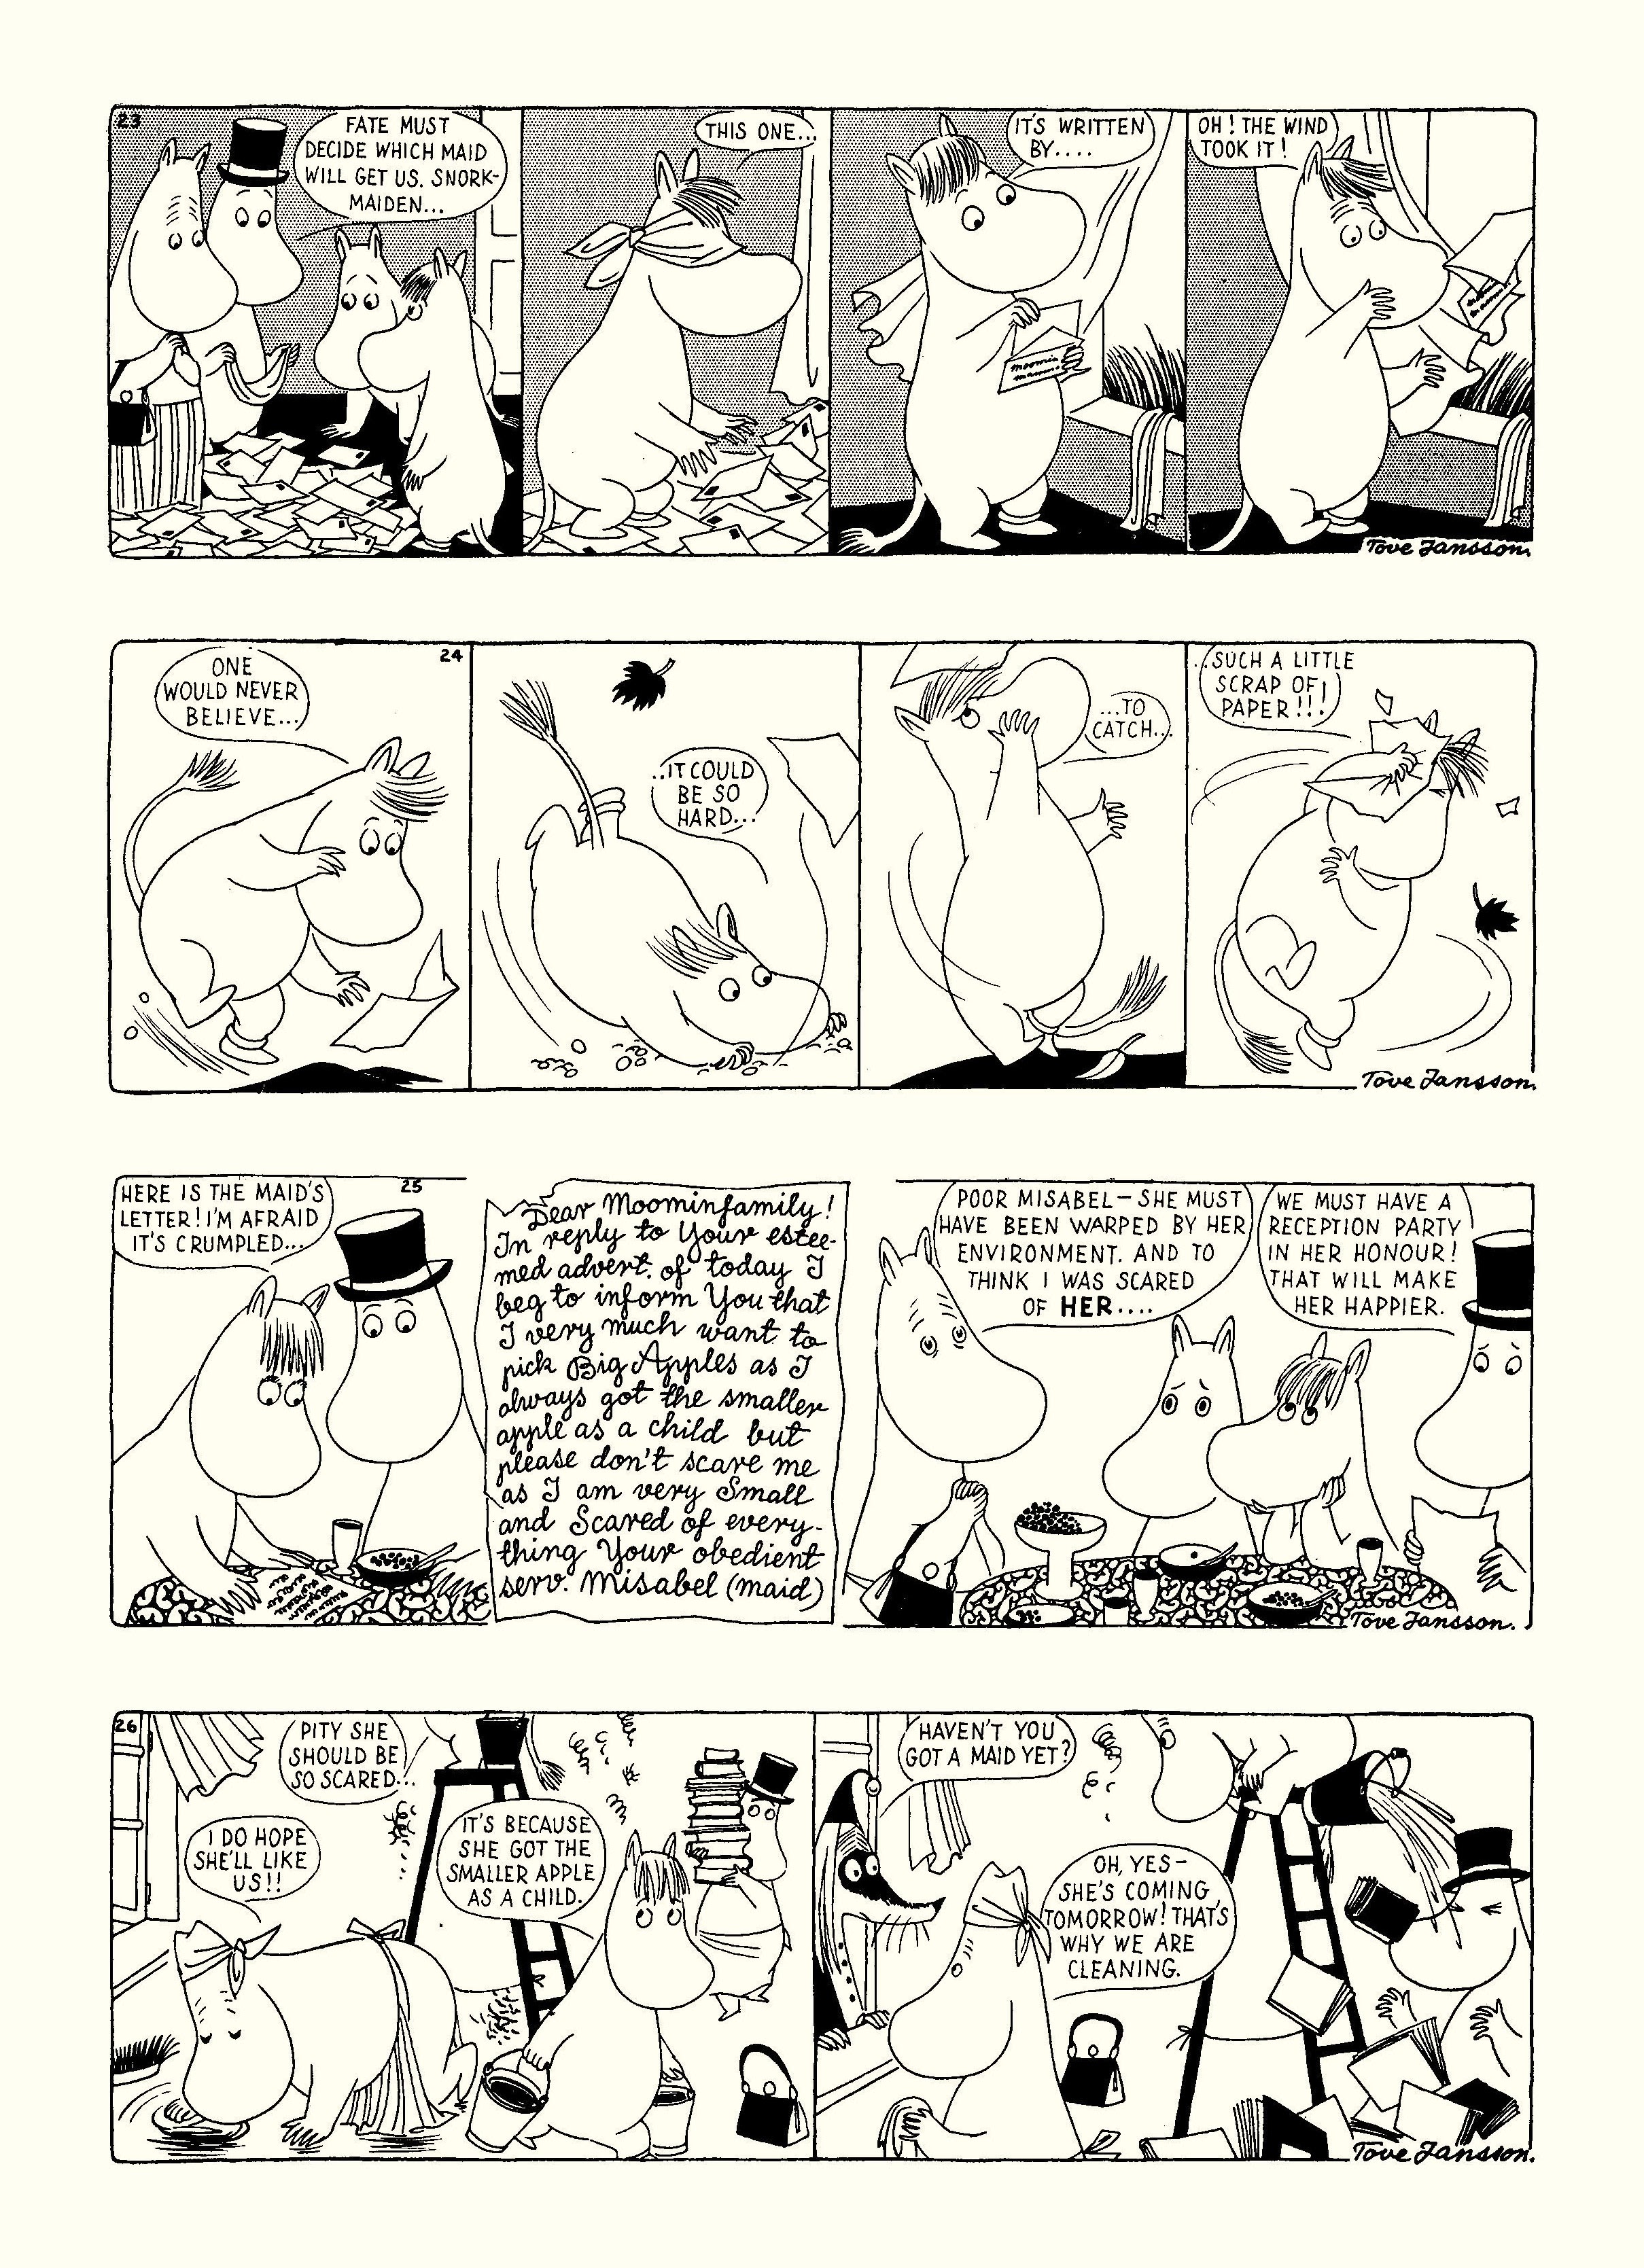 Read online Moomin: The Complete Tove Jansson Comic Strip comic -  Issue # TPB 2 - 33